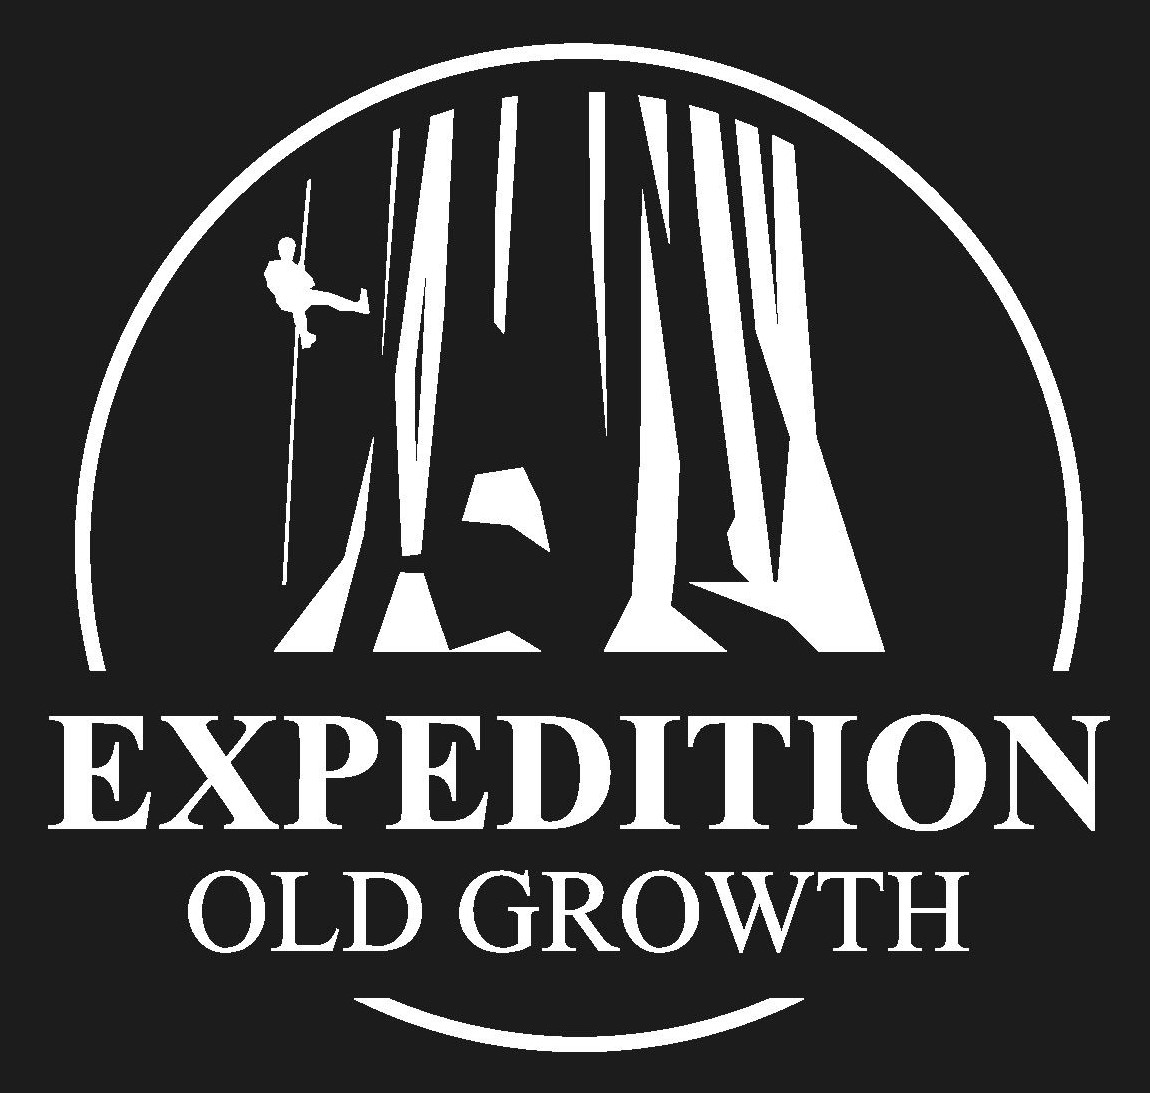 Expedition Old Growth